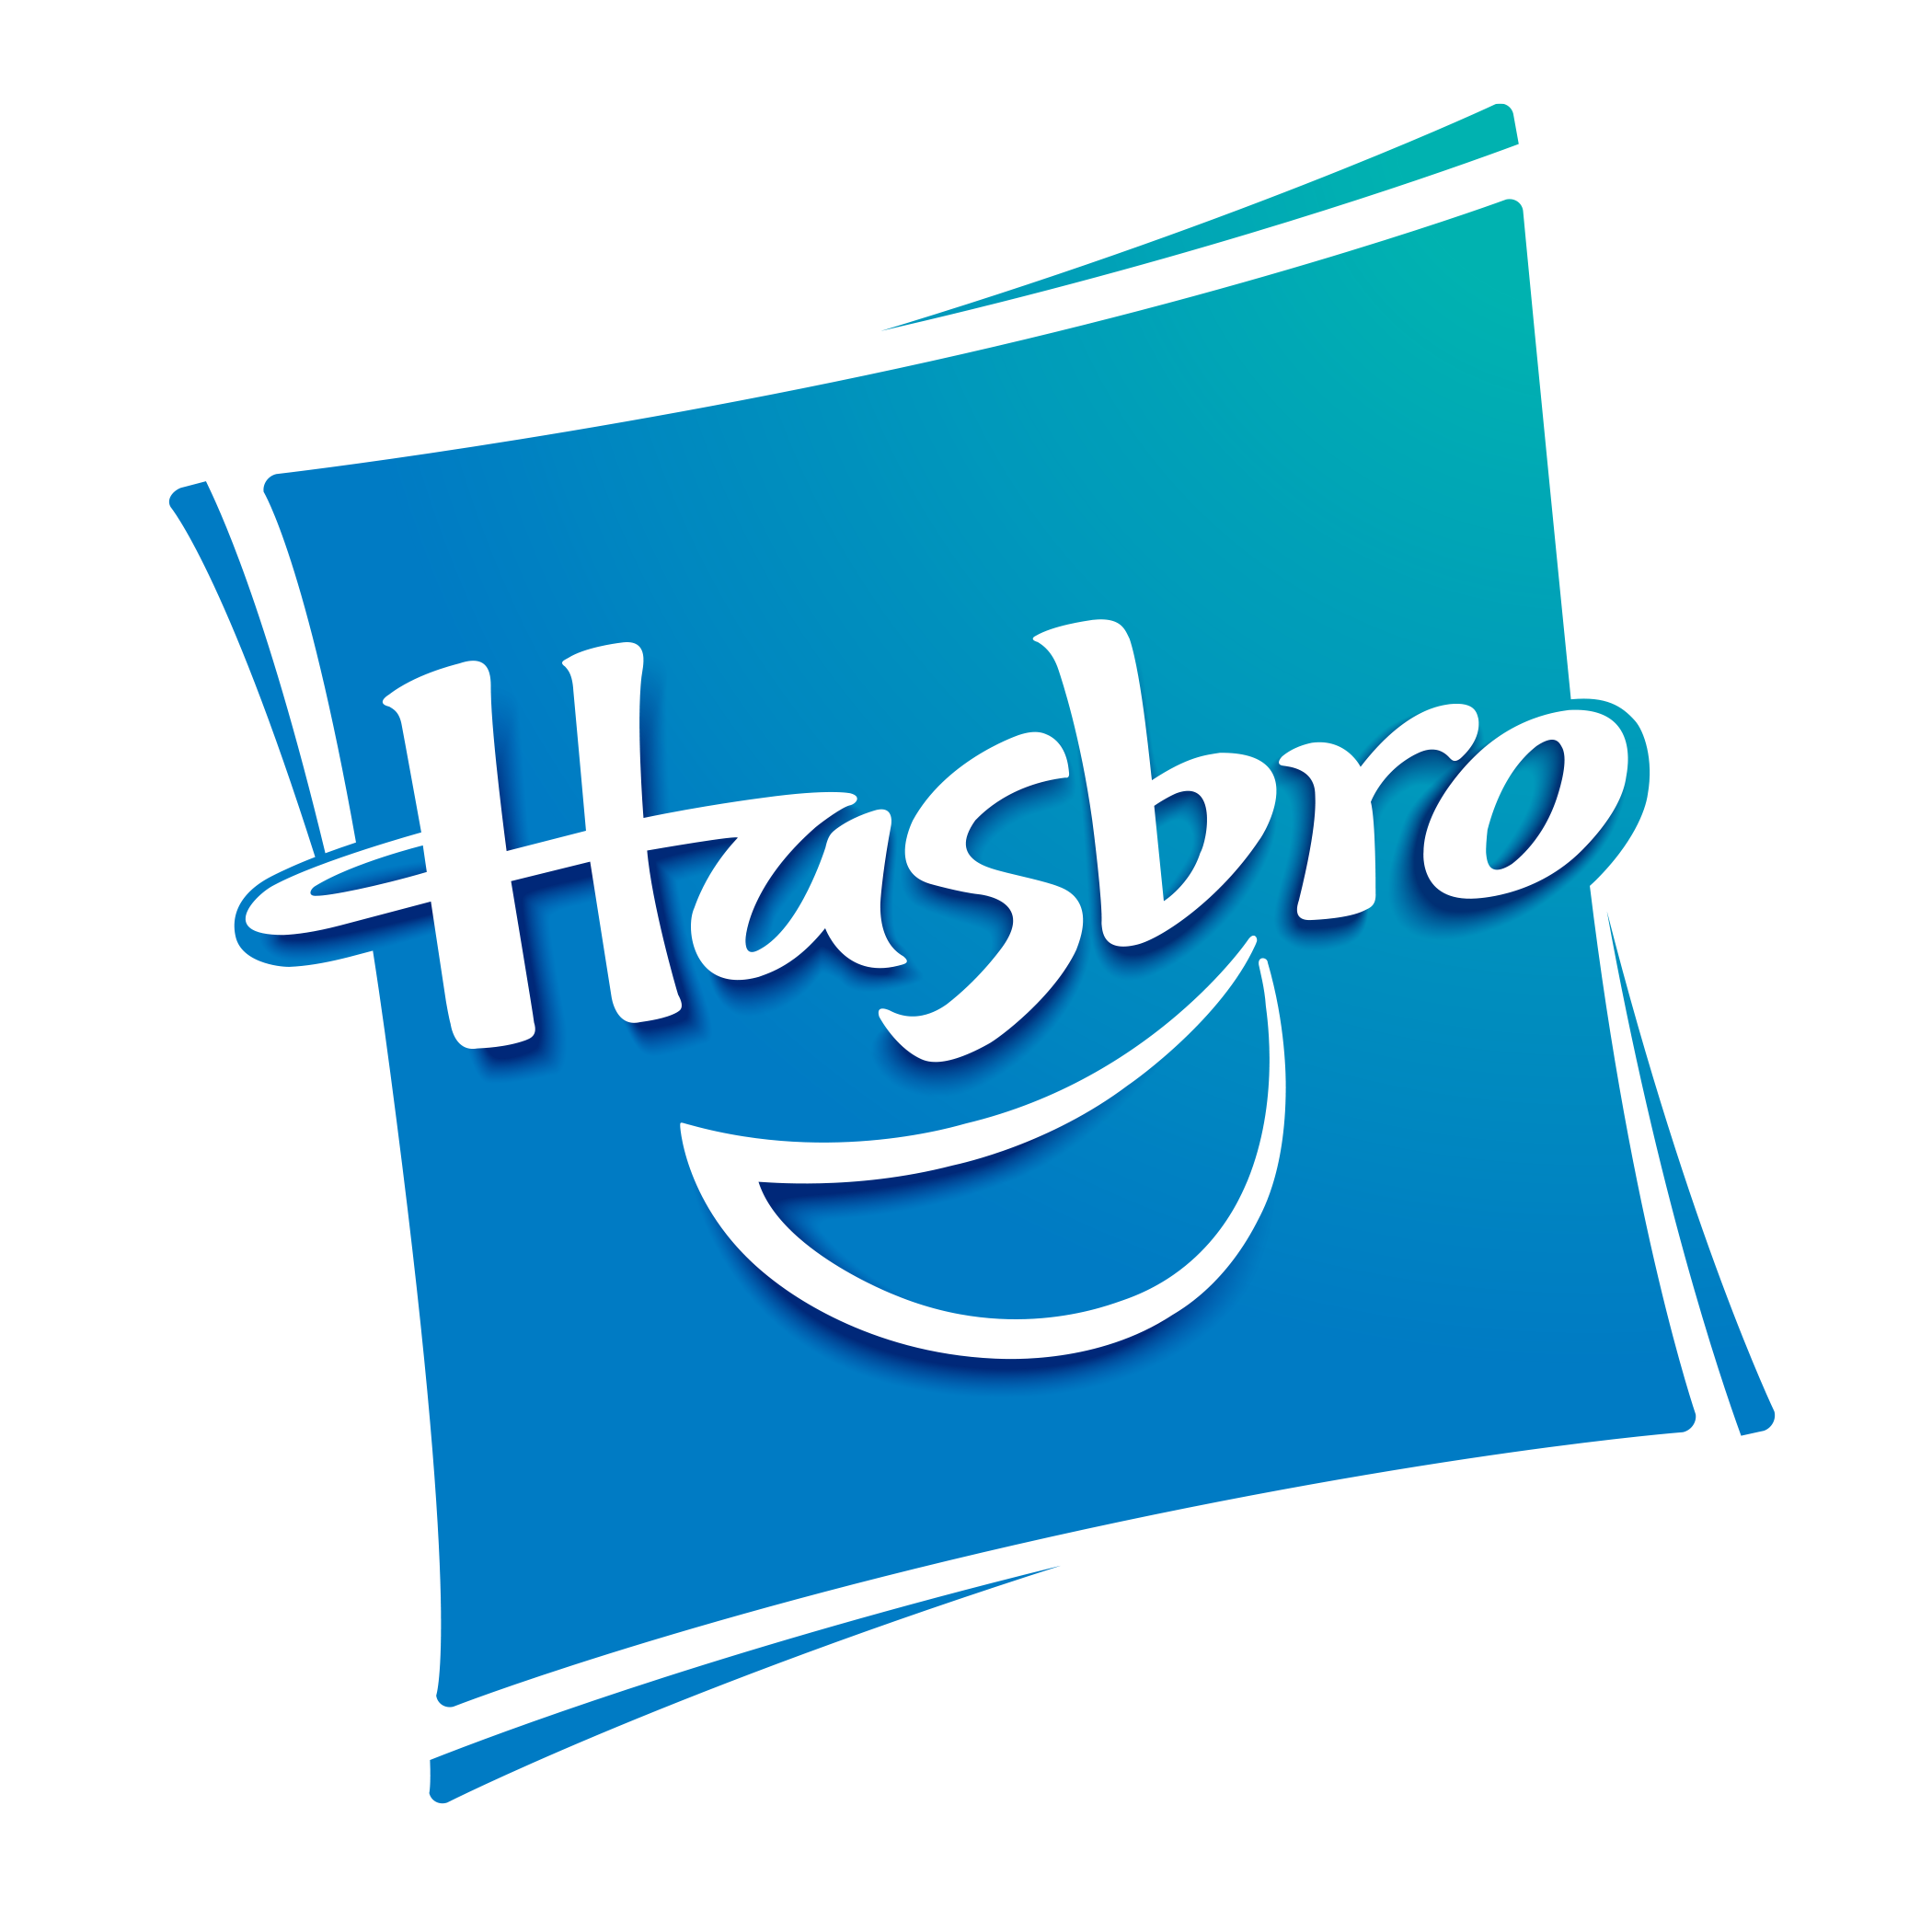 Hasbro Q4 And Full 2020 Investor Report Shows Best Year Ever For Magic: The Gathering